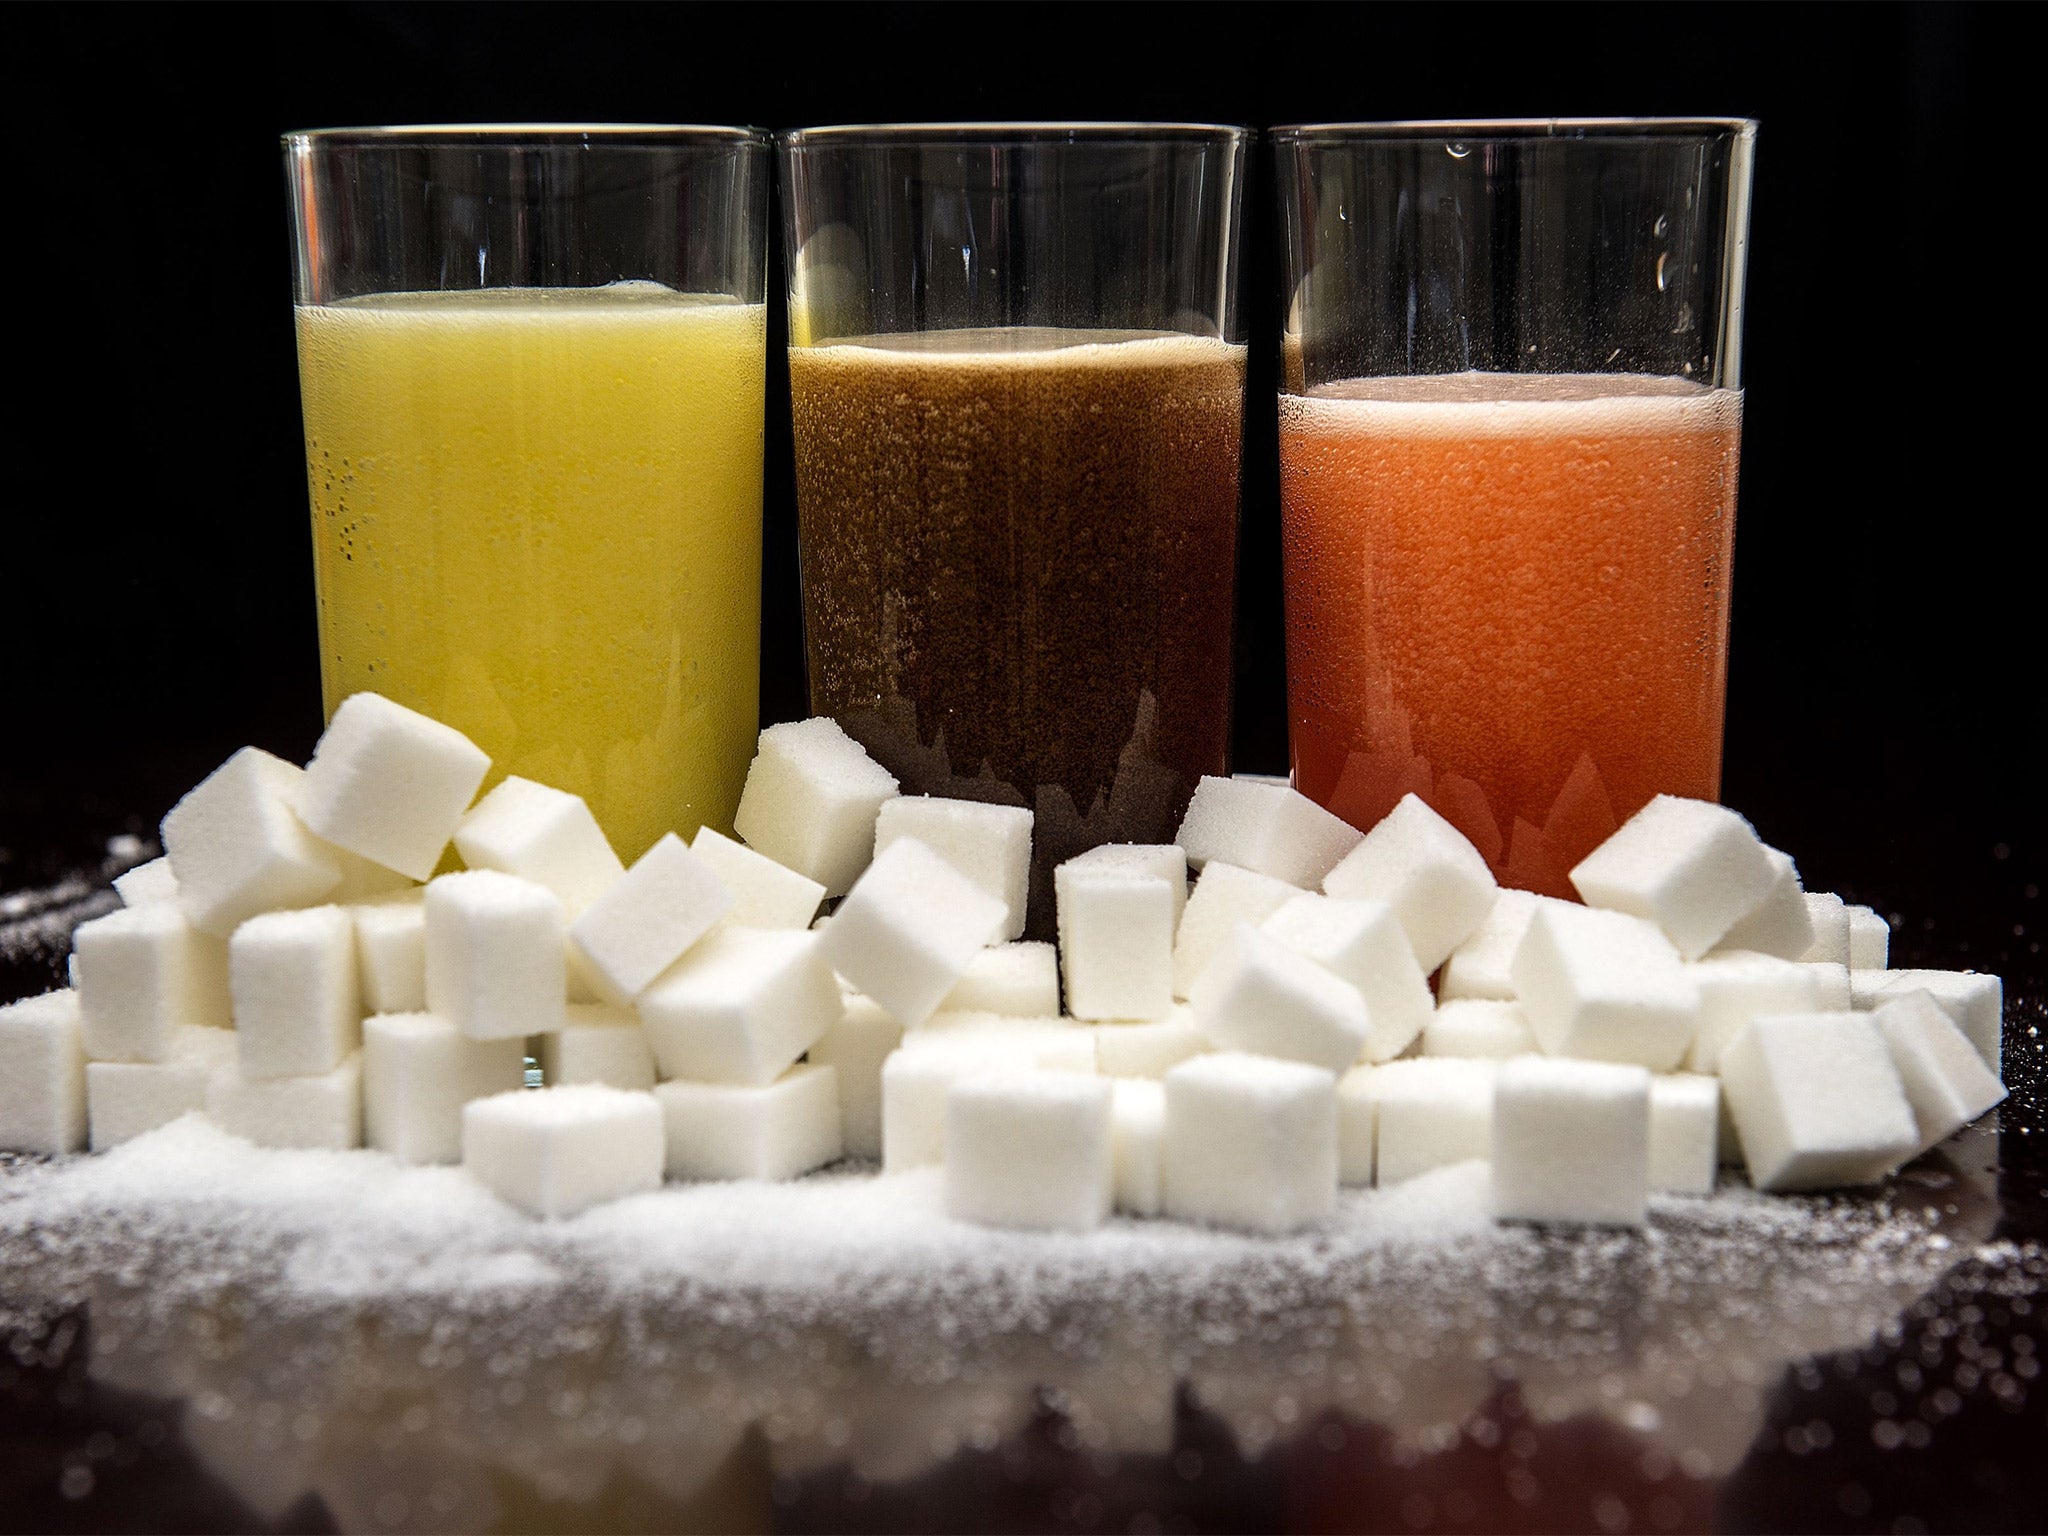 George Osborne announced a sugar tax on the soft drinks industry earlier this year